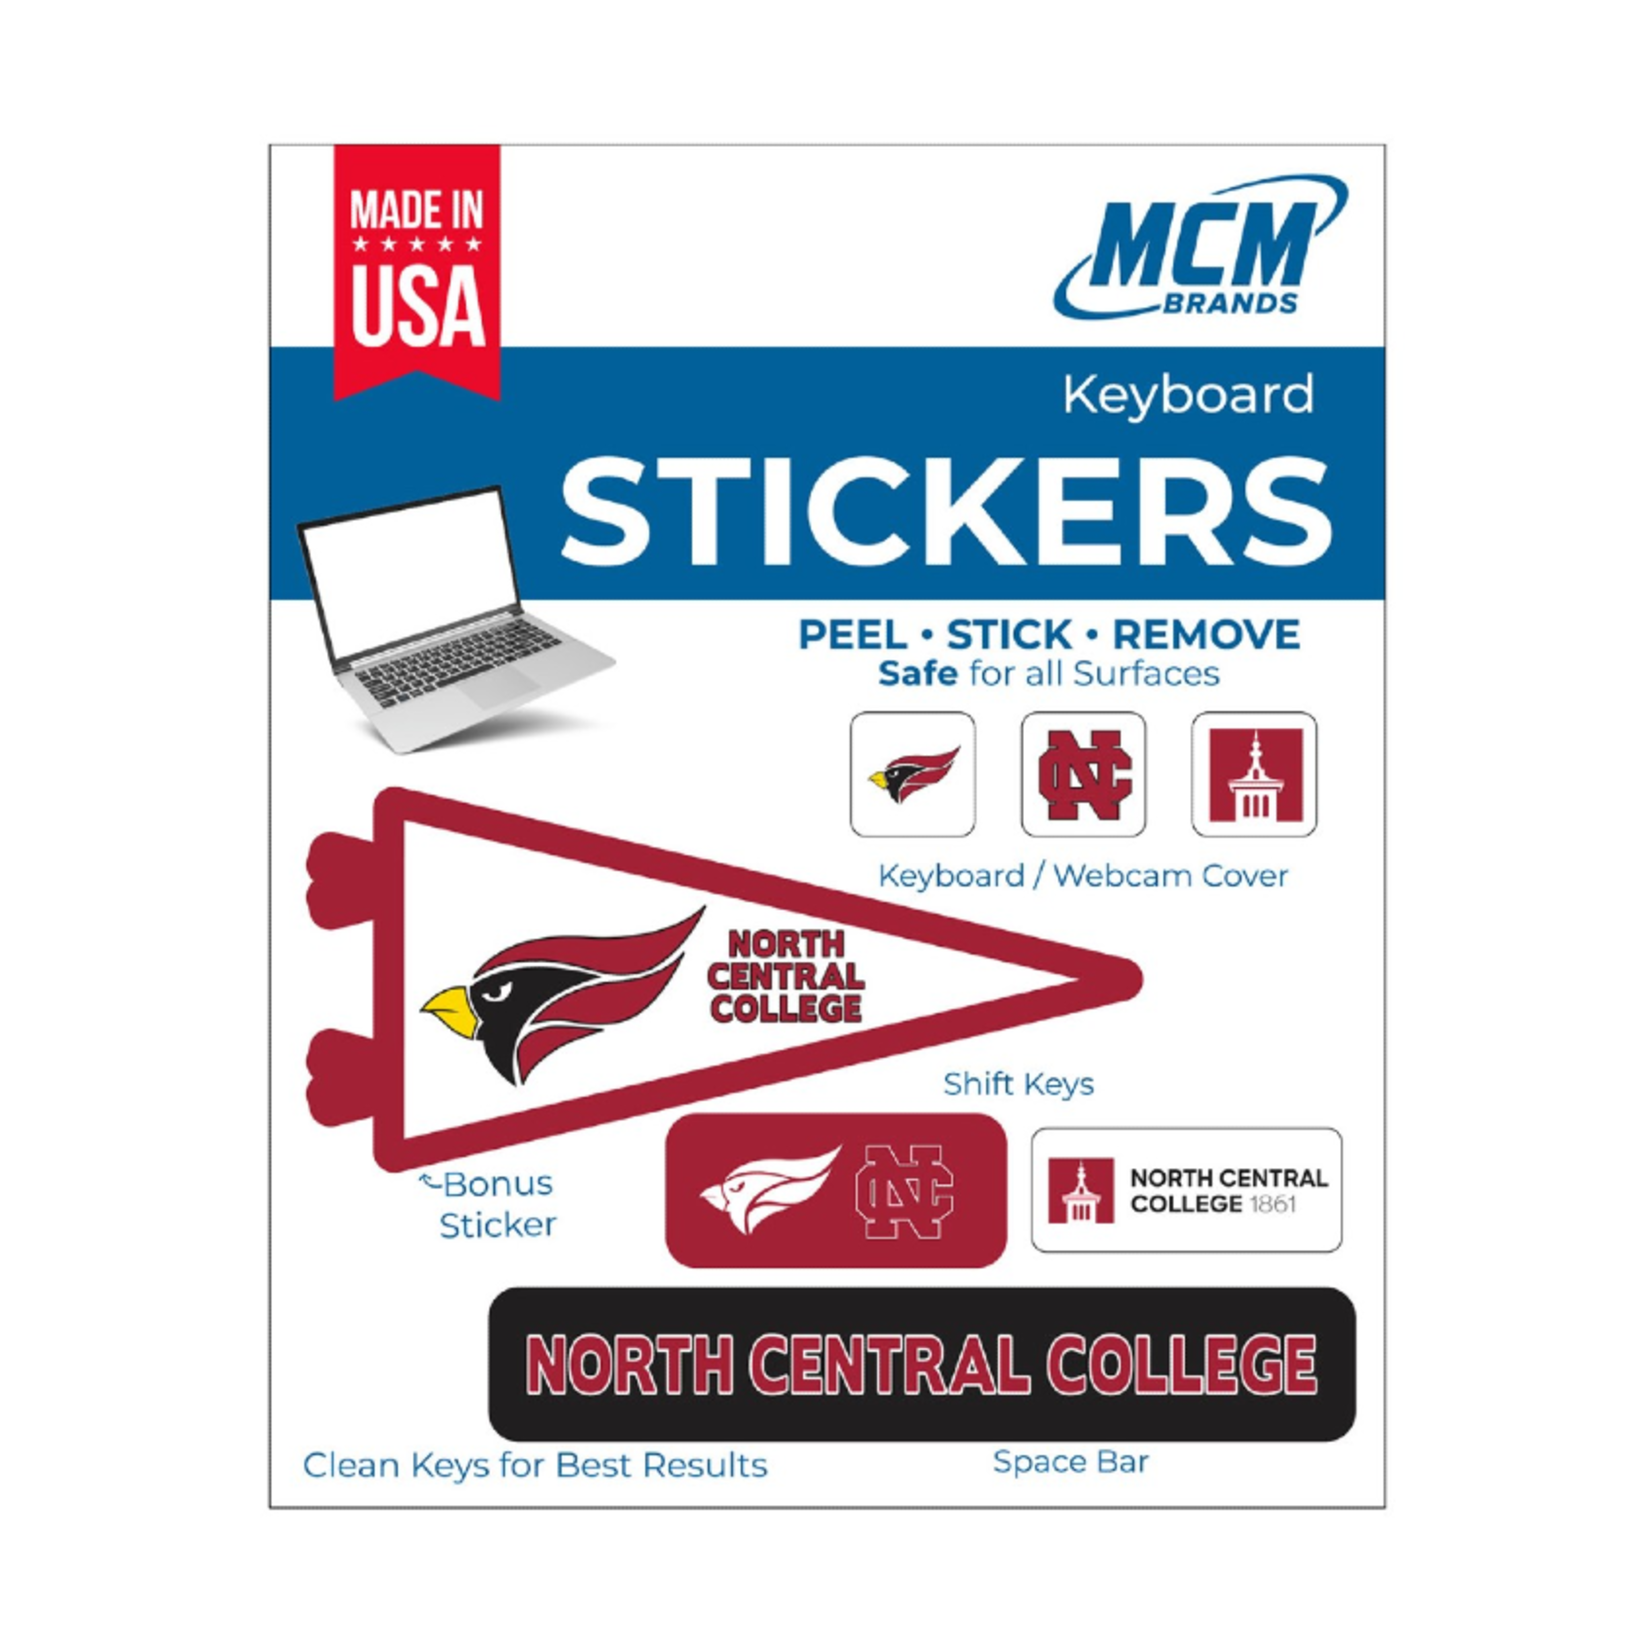 MCM Brands Stickers by MCM